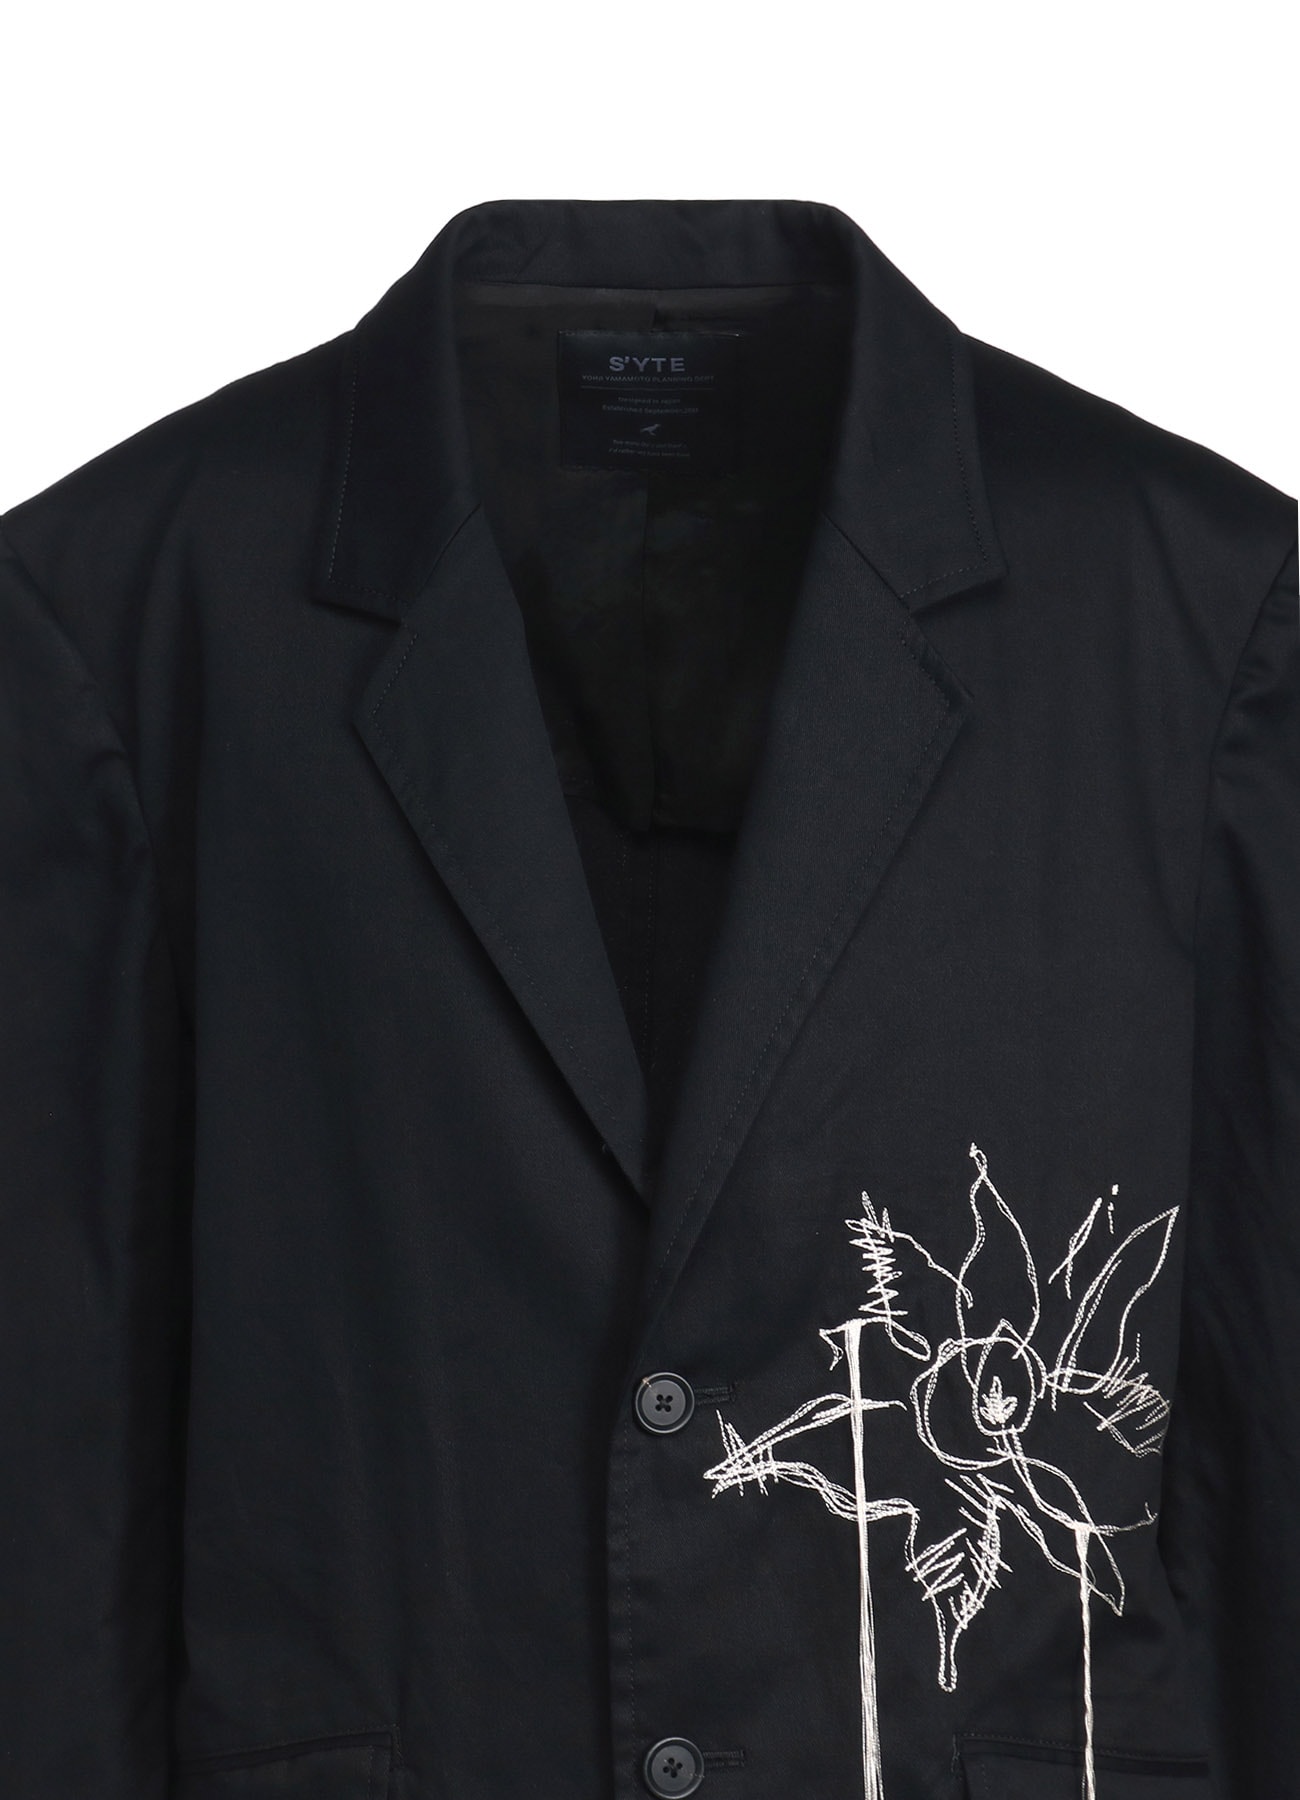 COTTON TWILL “QUEEN OF THE NIGHT“ EMBROIDERY JACKET